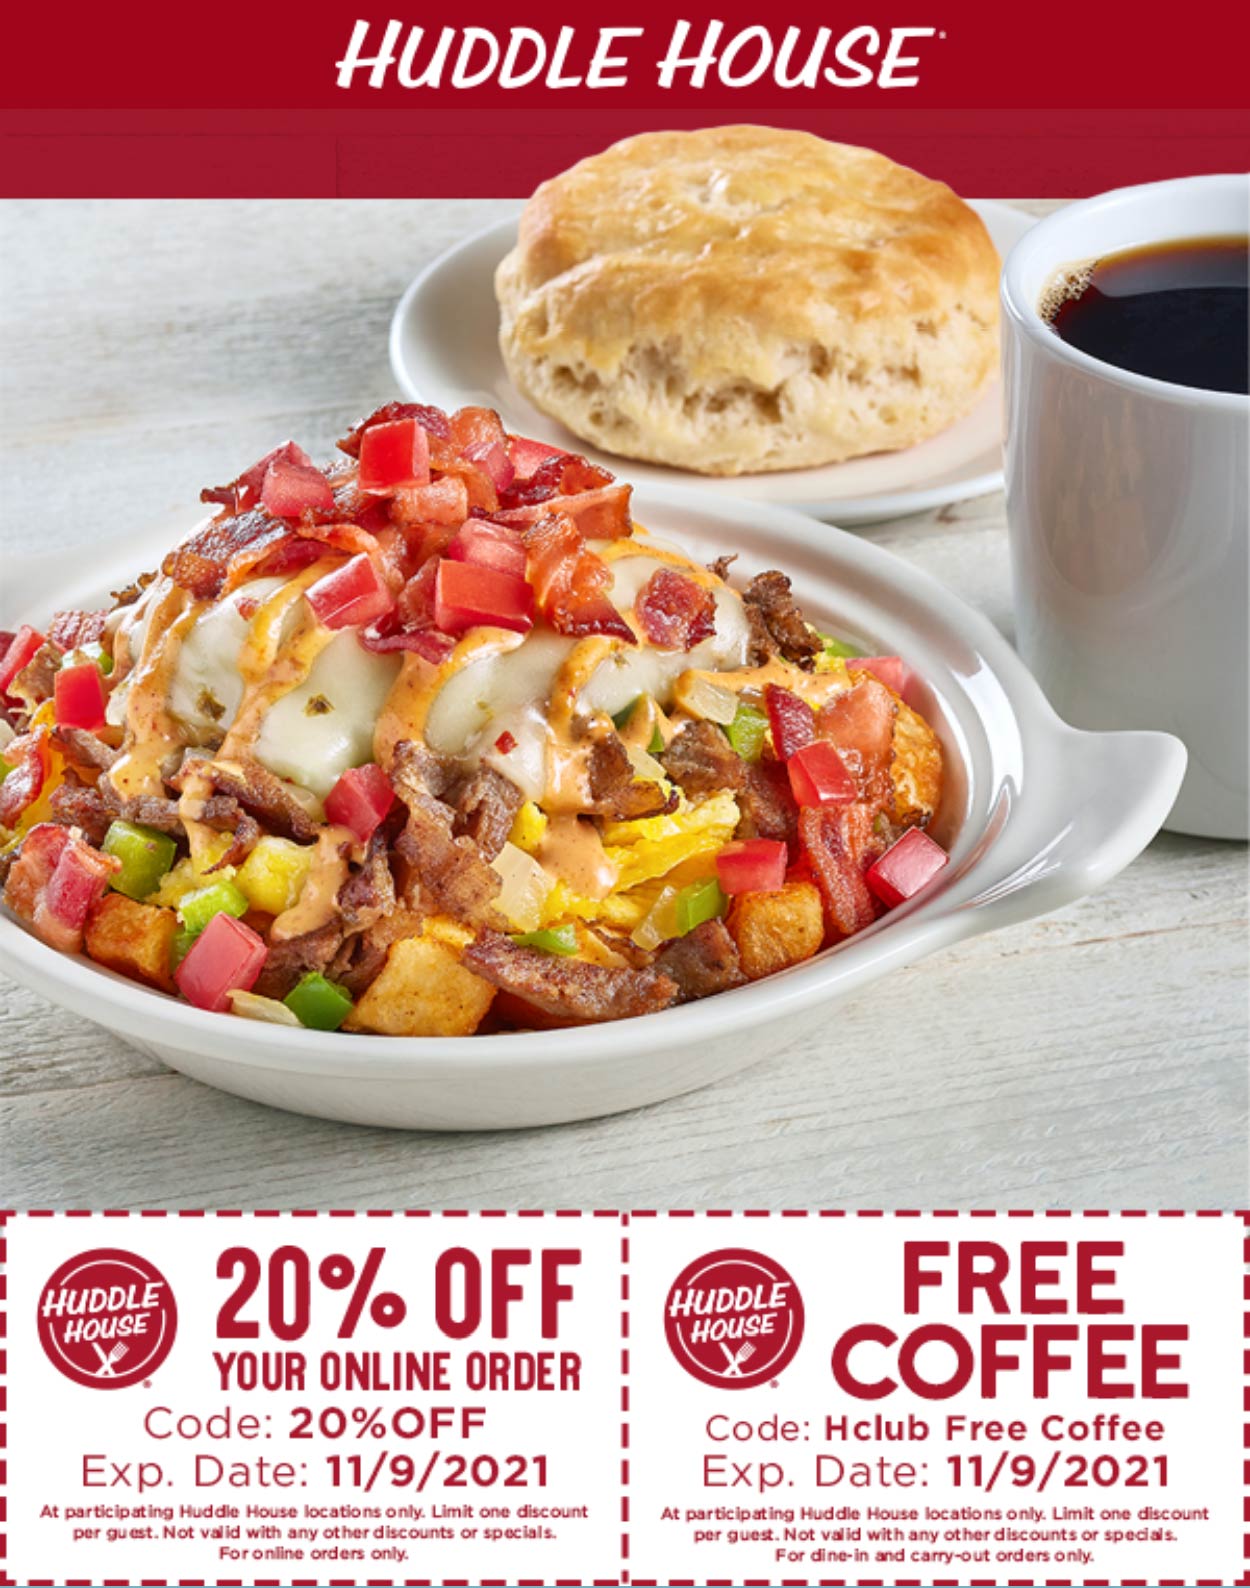 Huddle House restaurants Coupon  20% off & free coffee at Huddle House restaurants via promo code 20%OFF #huddlehouse 